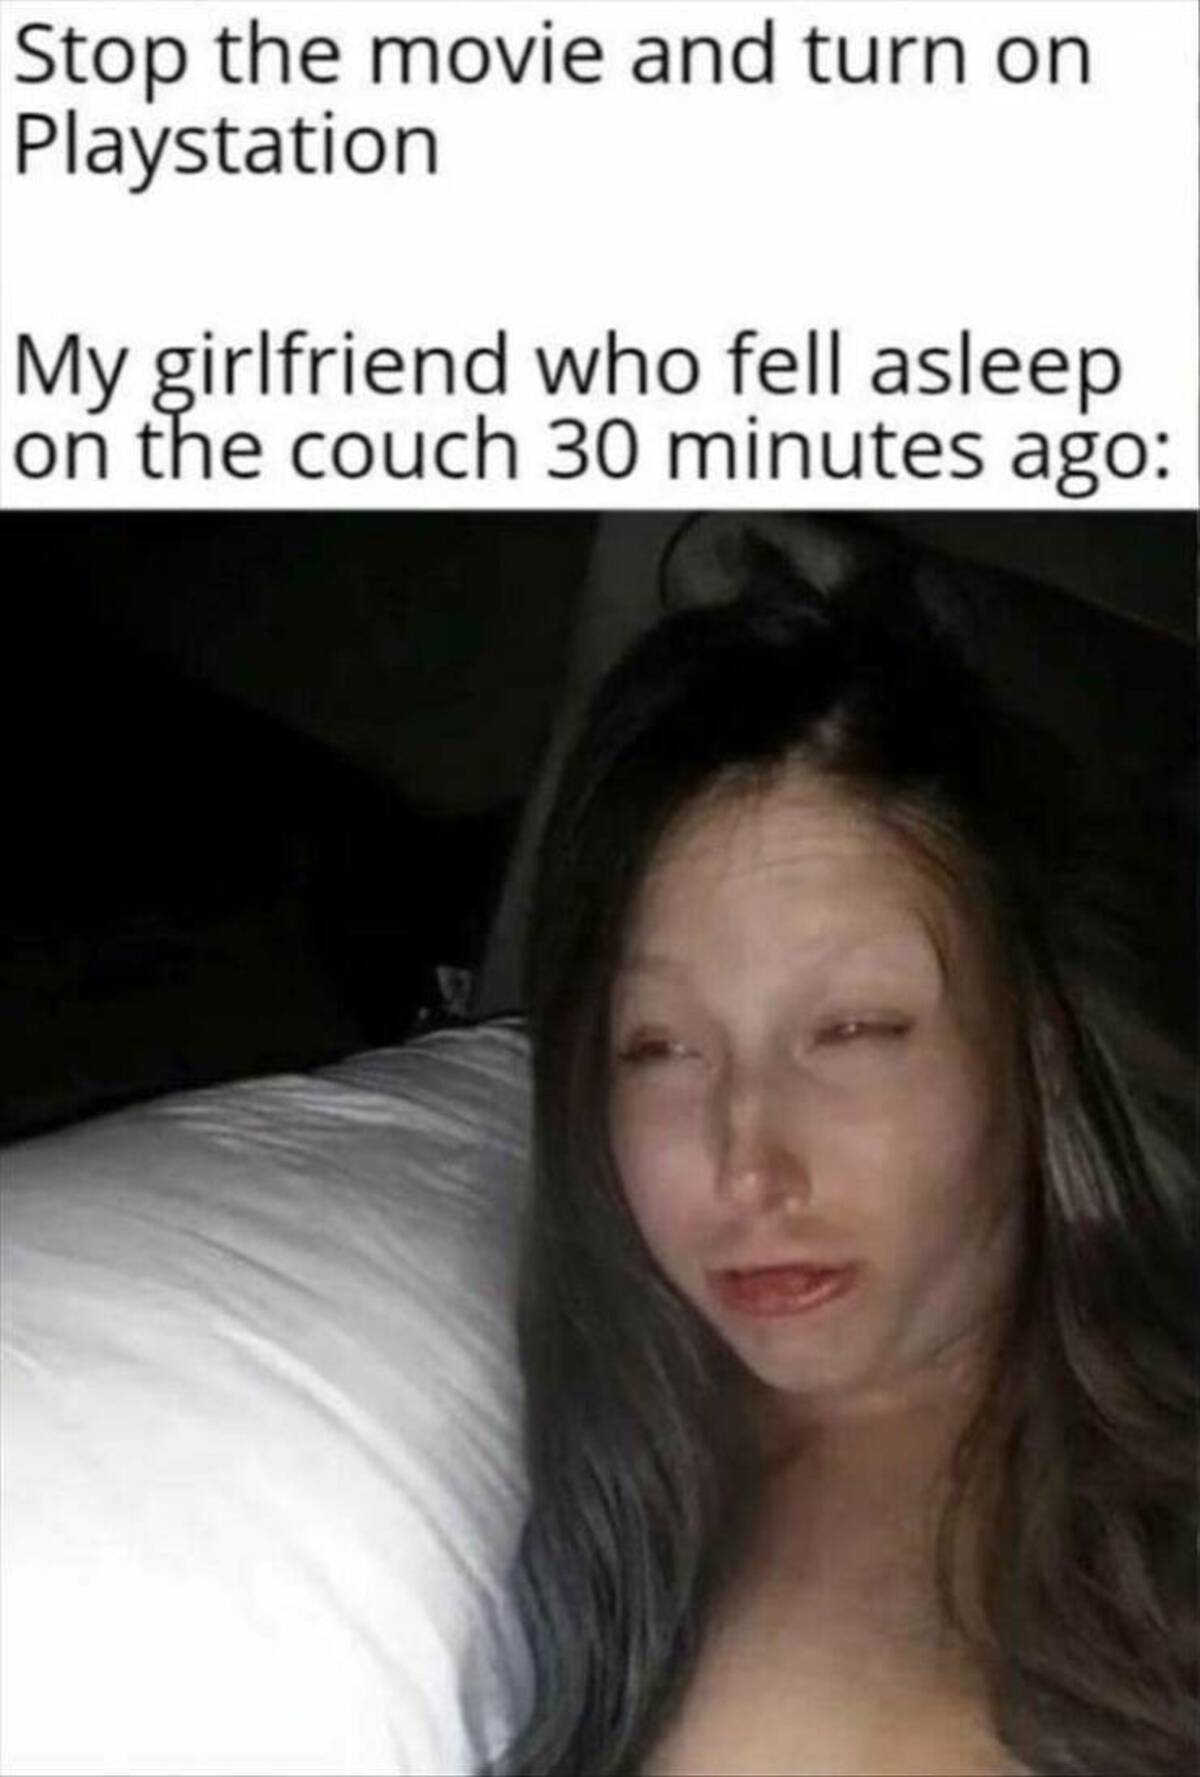 girl - Stop the movie and turn on Playstation My girlfriend who fell asleep on the couch 30 minutes ago